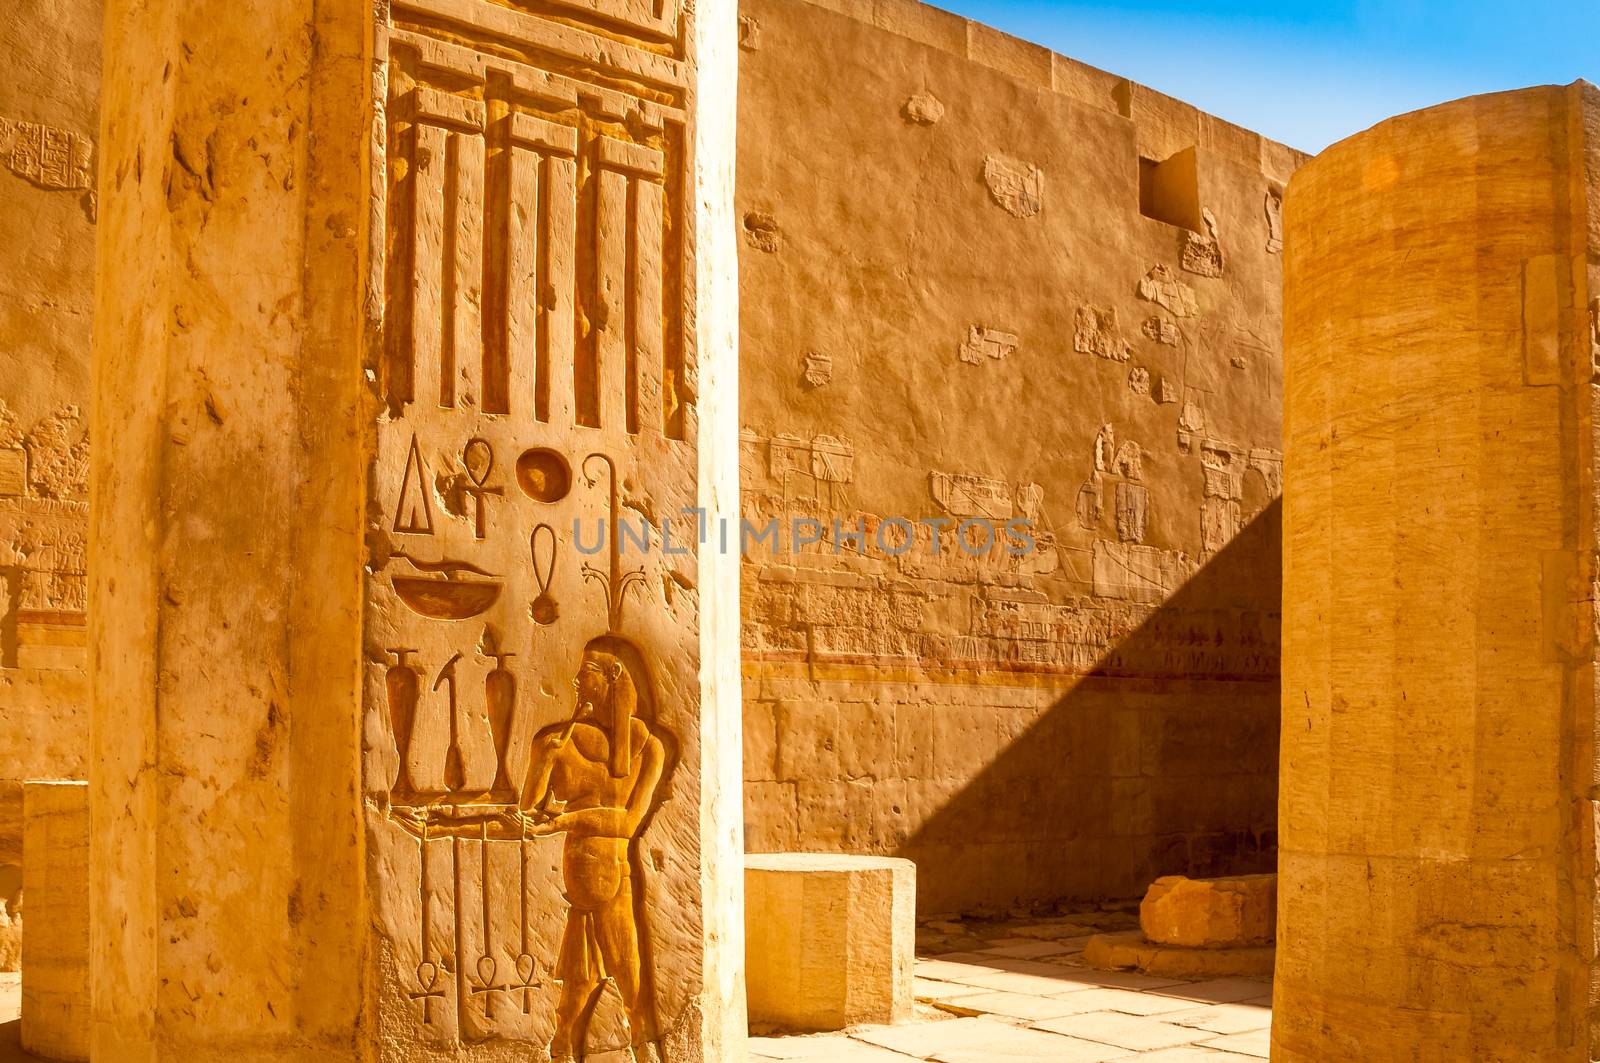 Ancient hieroglyphs carved in stone walls, Hatshepsut temple, Eg by martinm303